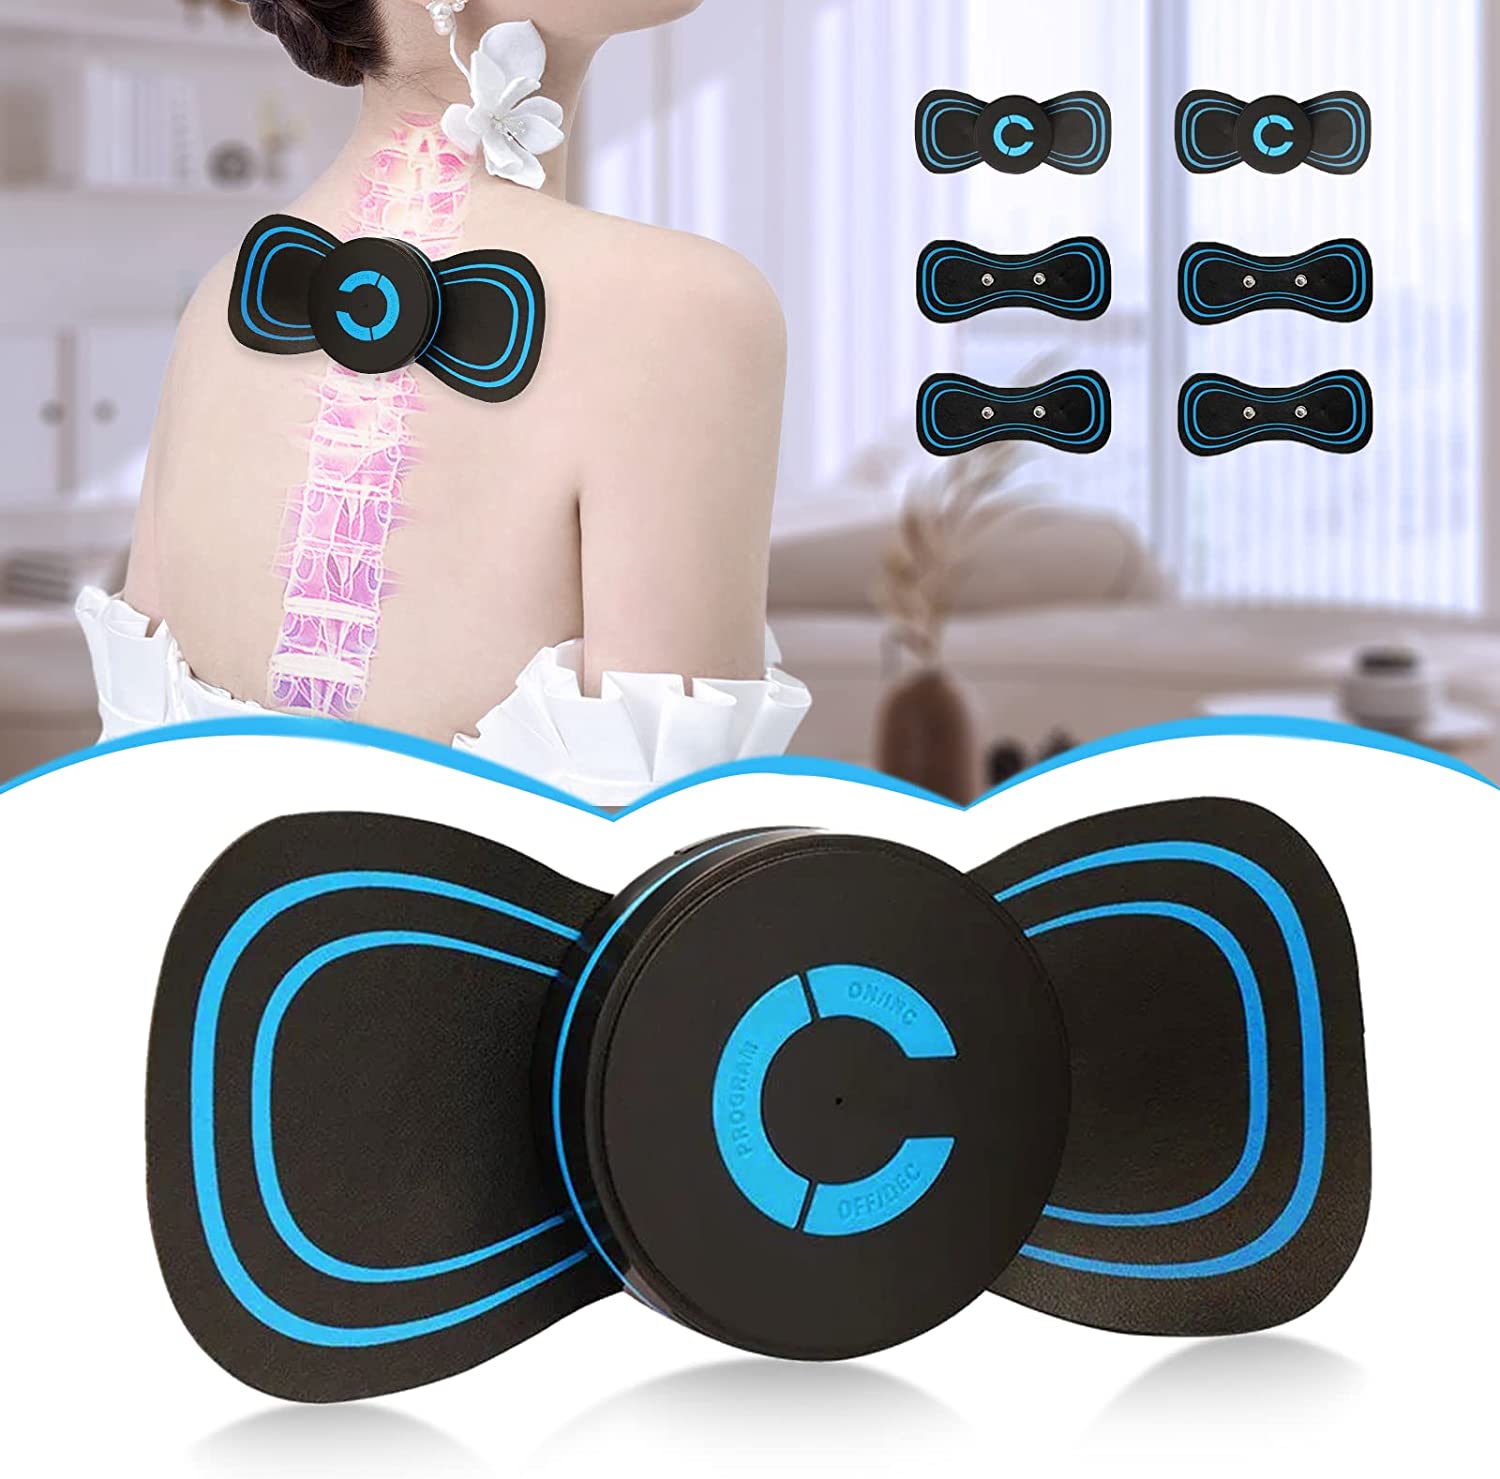 Nooro Nmes Whole Body Massager Review